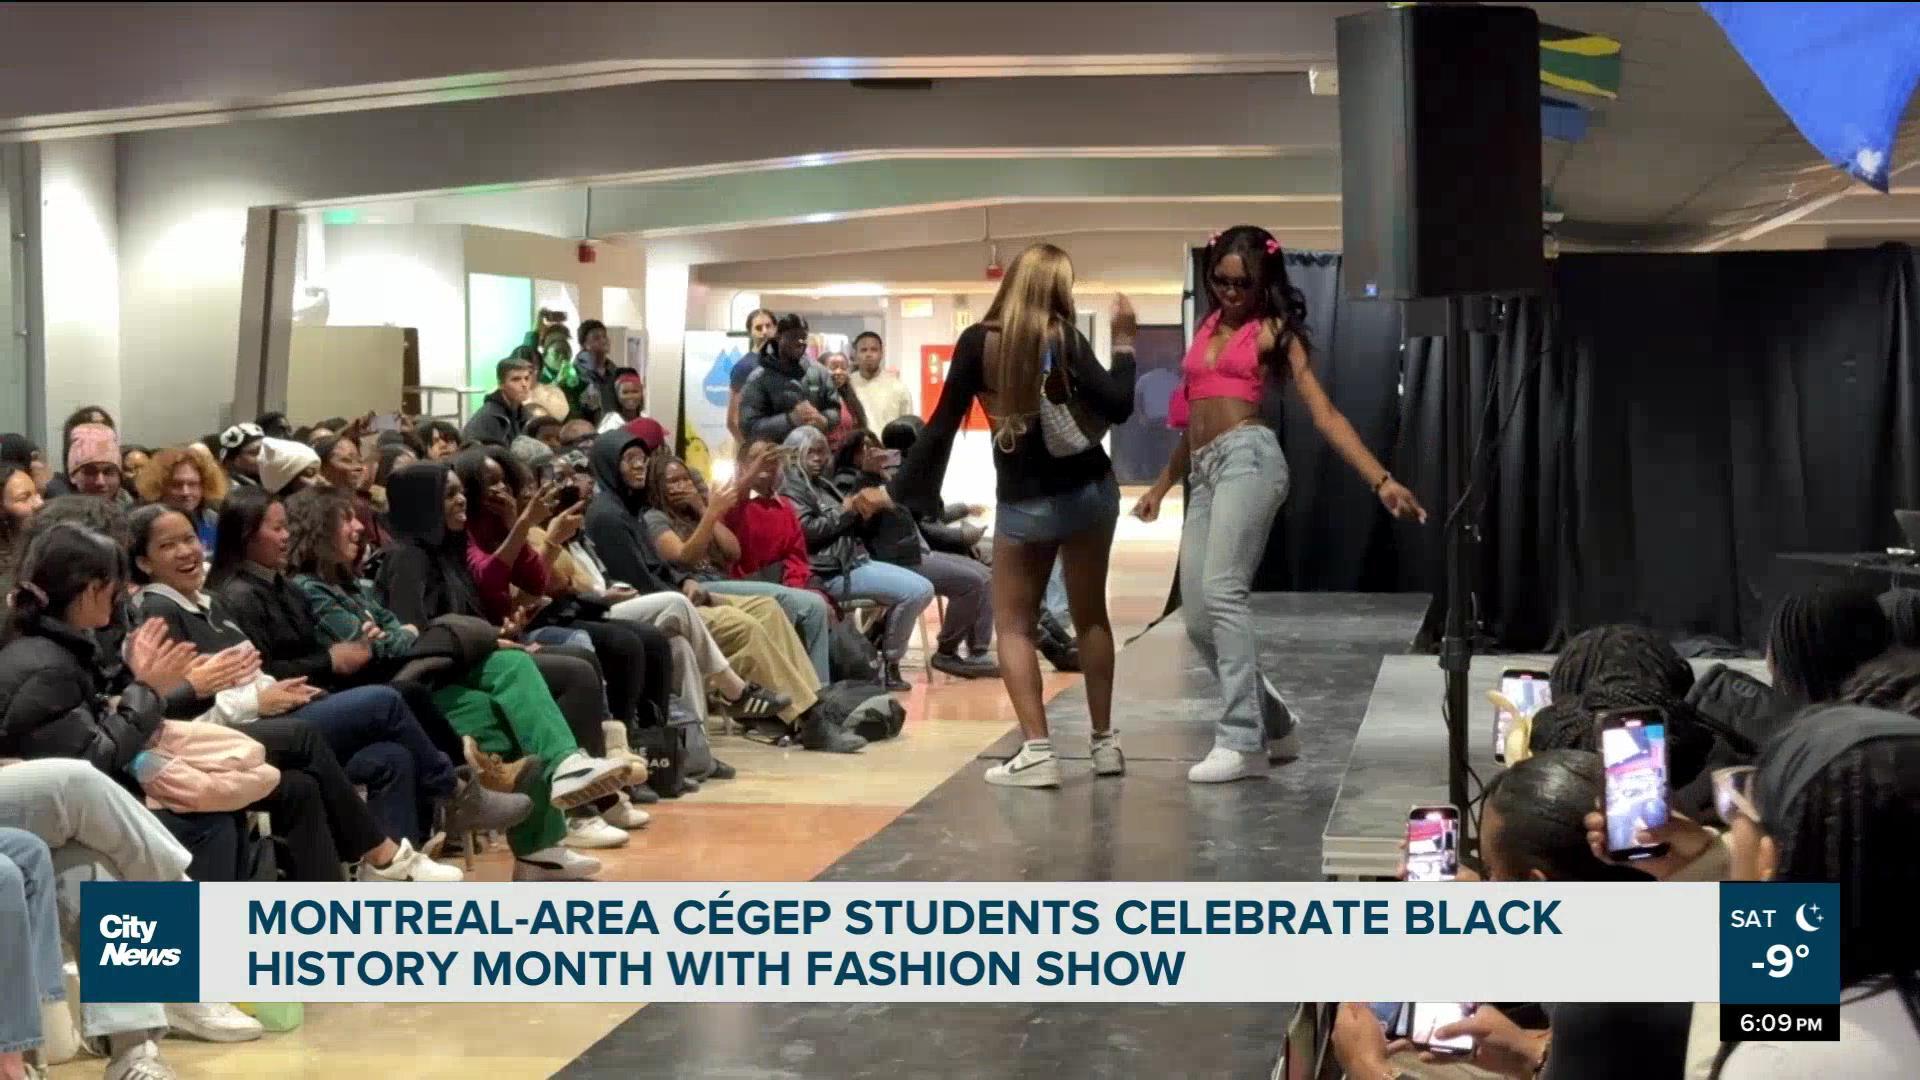 Montreal-area students celebrate Black excellence in fashion